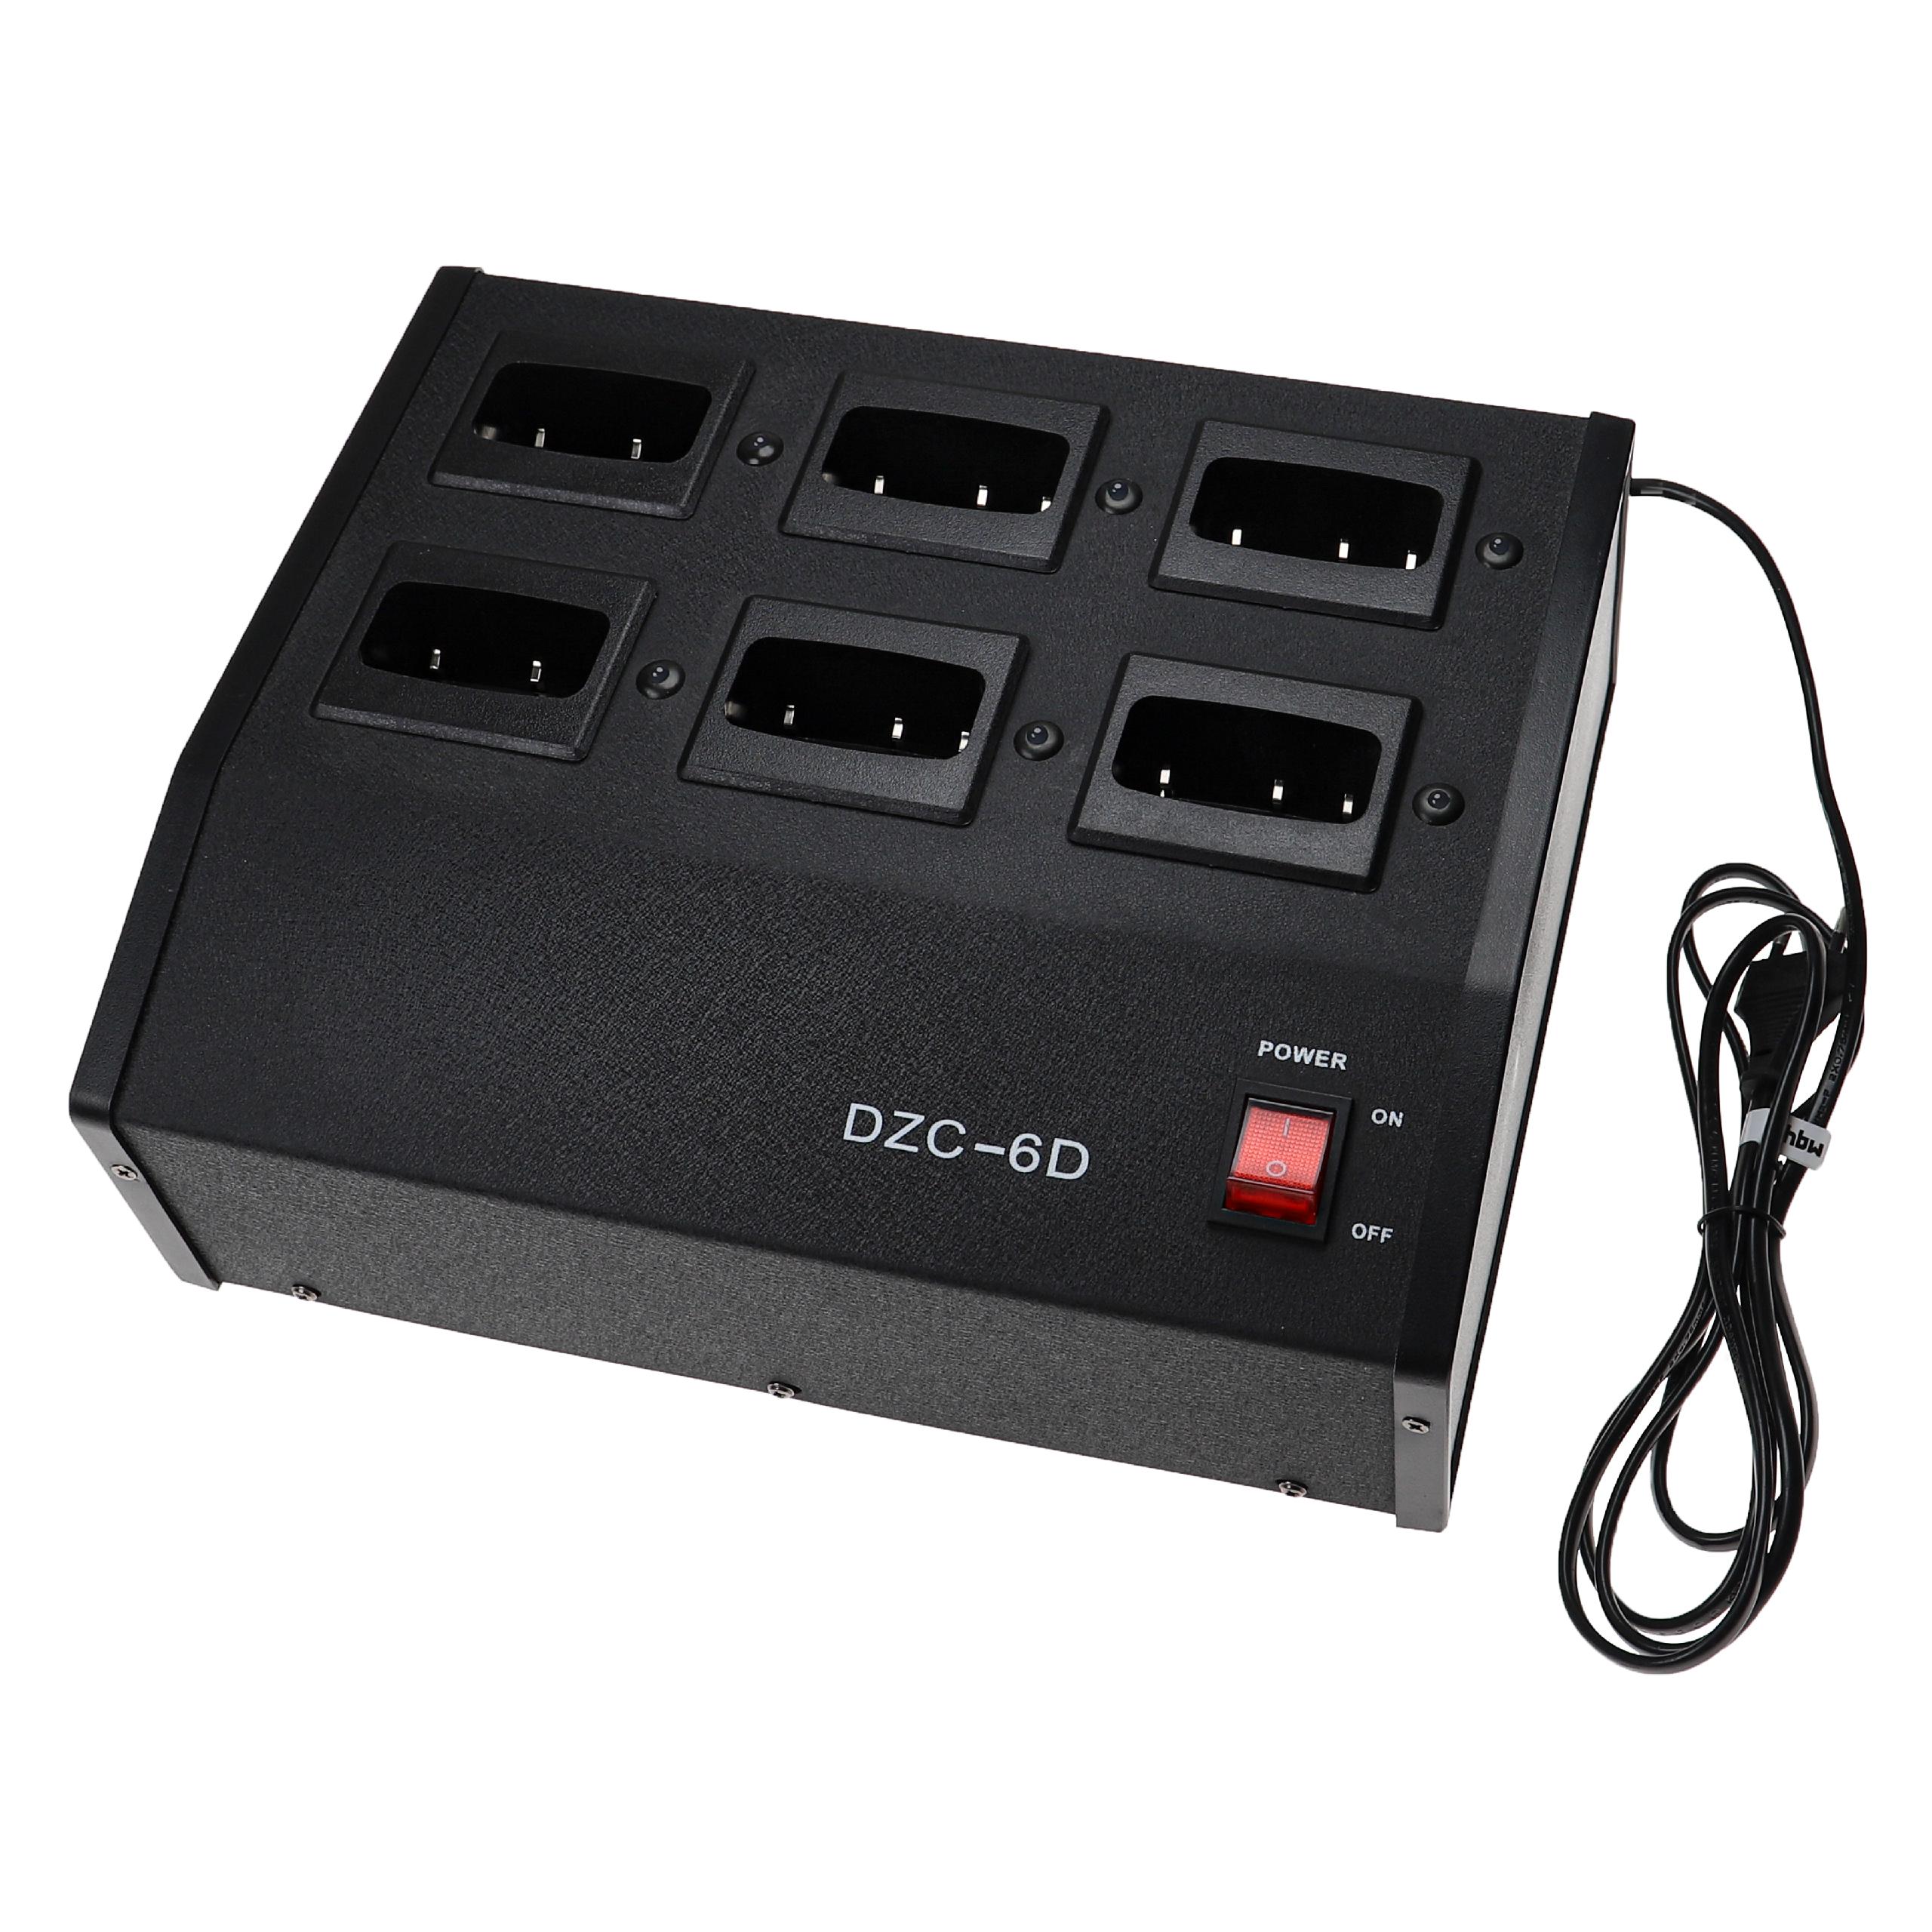 Charger Suitable for Midland 73-30 Radio Batteries - 15 V, 7 A